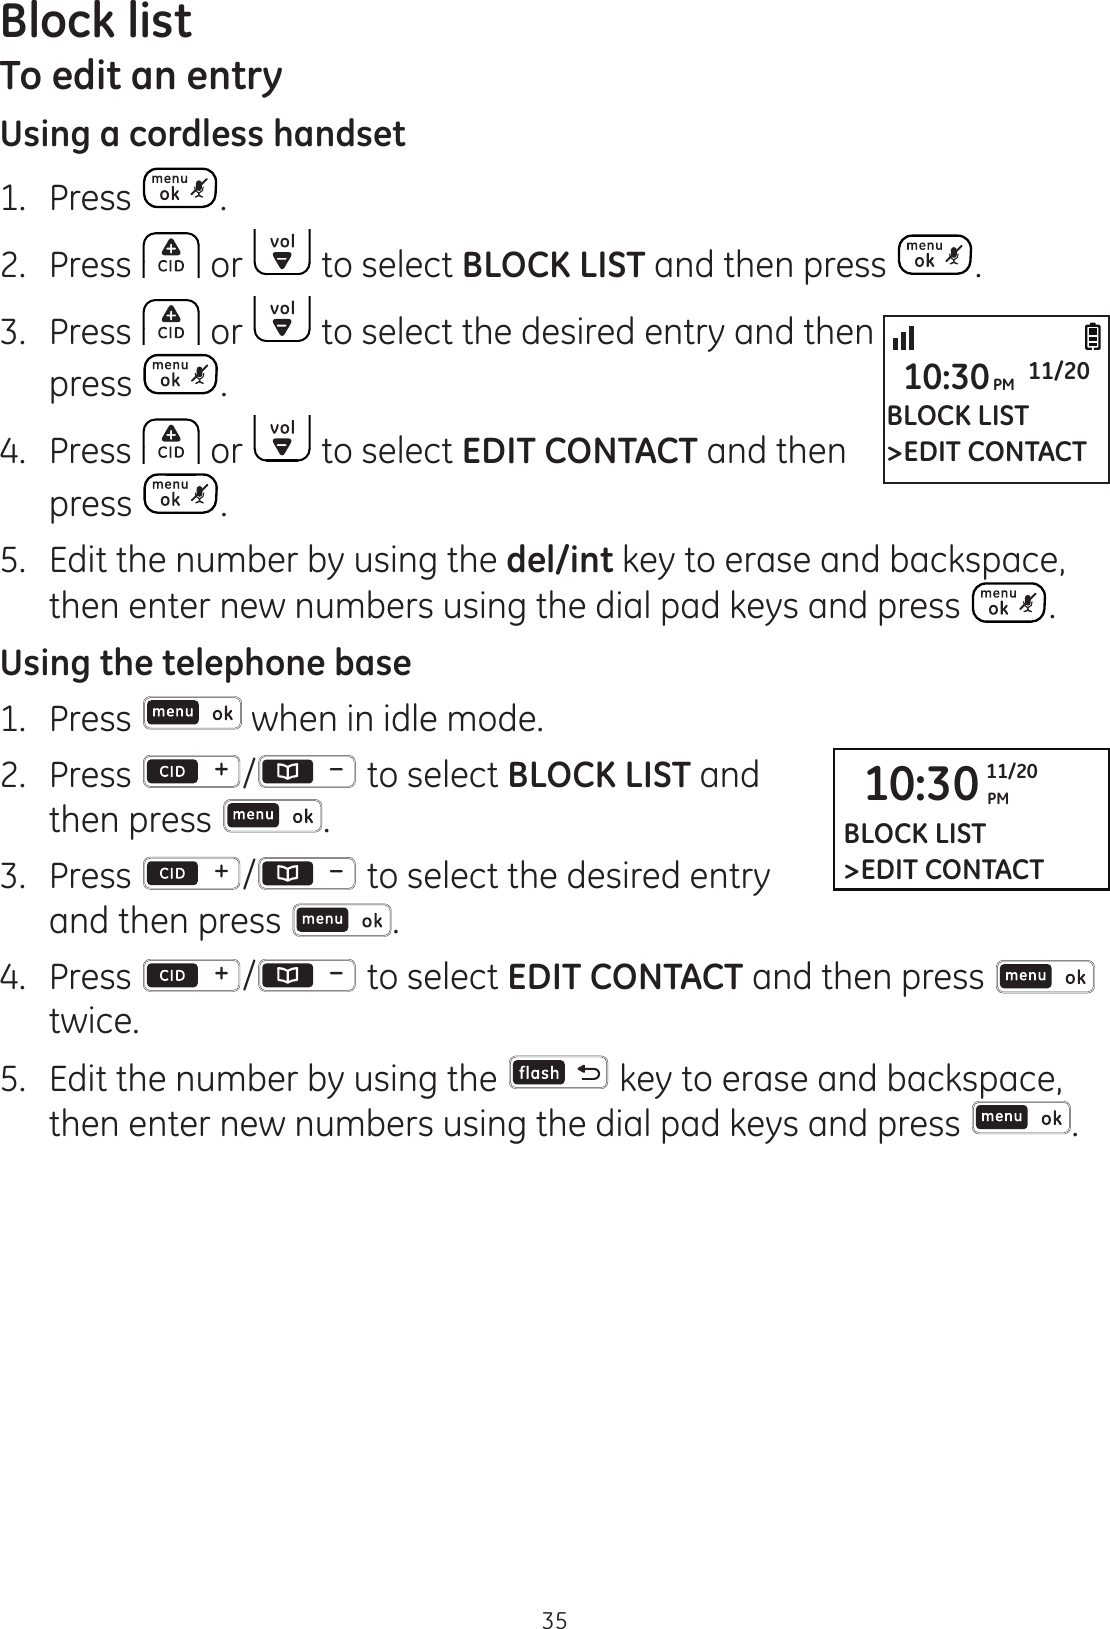 Block list35To edit an entryUsing a cordless handset1.   Press . 2.  Press   or   to select BLOCK LIST and then press  .3.  Press   or   to select the desired entry and then press  . 4.  Press   or   to select EDIT CONTACT and then press  .5.  Edit the number by using the del/int key to erase and backspace, then enter new numbers using the dial pad keys and press  .Using the telephone base1.  Press   when in idle mode. 2.   Press  /  to select BLOCK LIST and then press  .3.  Press  /  to select the desired entry and then press  .4.  Press  /  to select EDIT CONTACT and then press   twice.5.  Edit the number by using the   key to erase and backspace, then enter new numbers using the dial pad keys and press  .BLOCK LIST&gt;EDIT CONTACT10:30PM 11/2010:30 PM11/20BLOCK LIST&gt;EDIT CONTACT